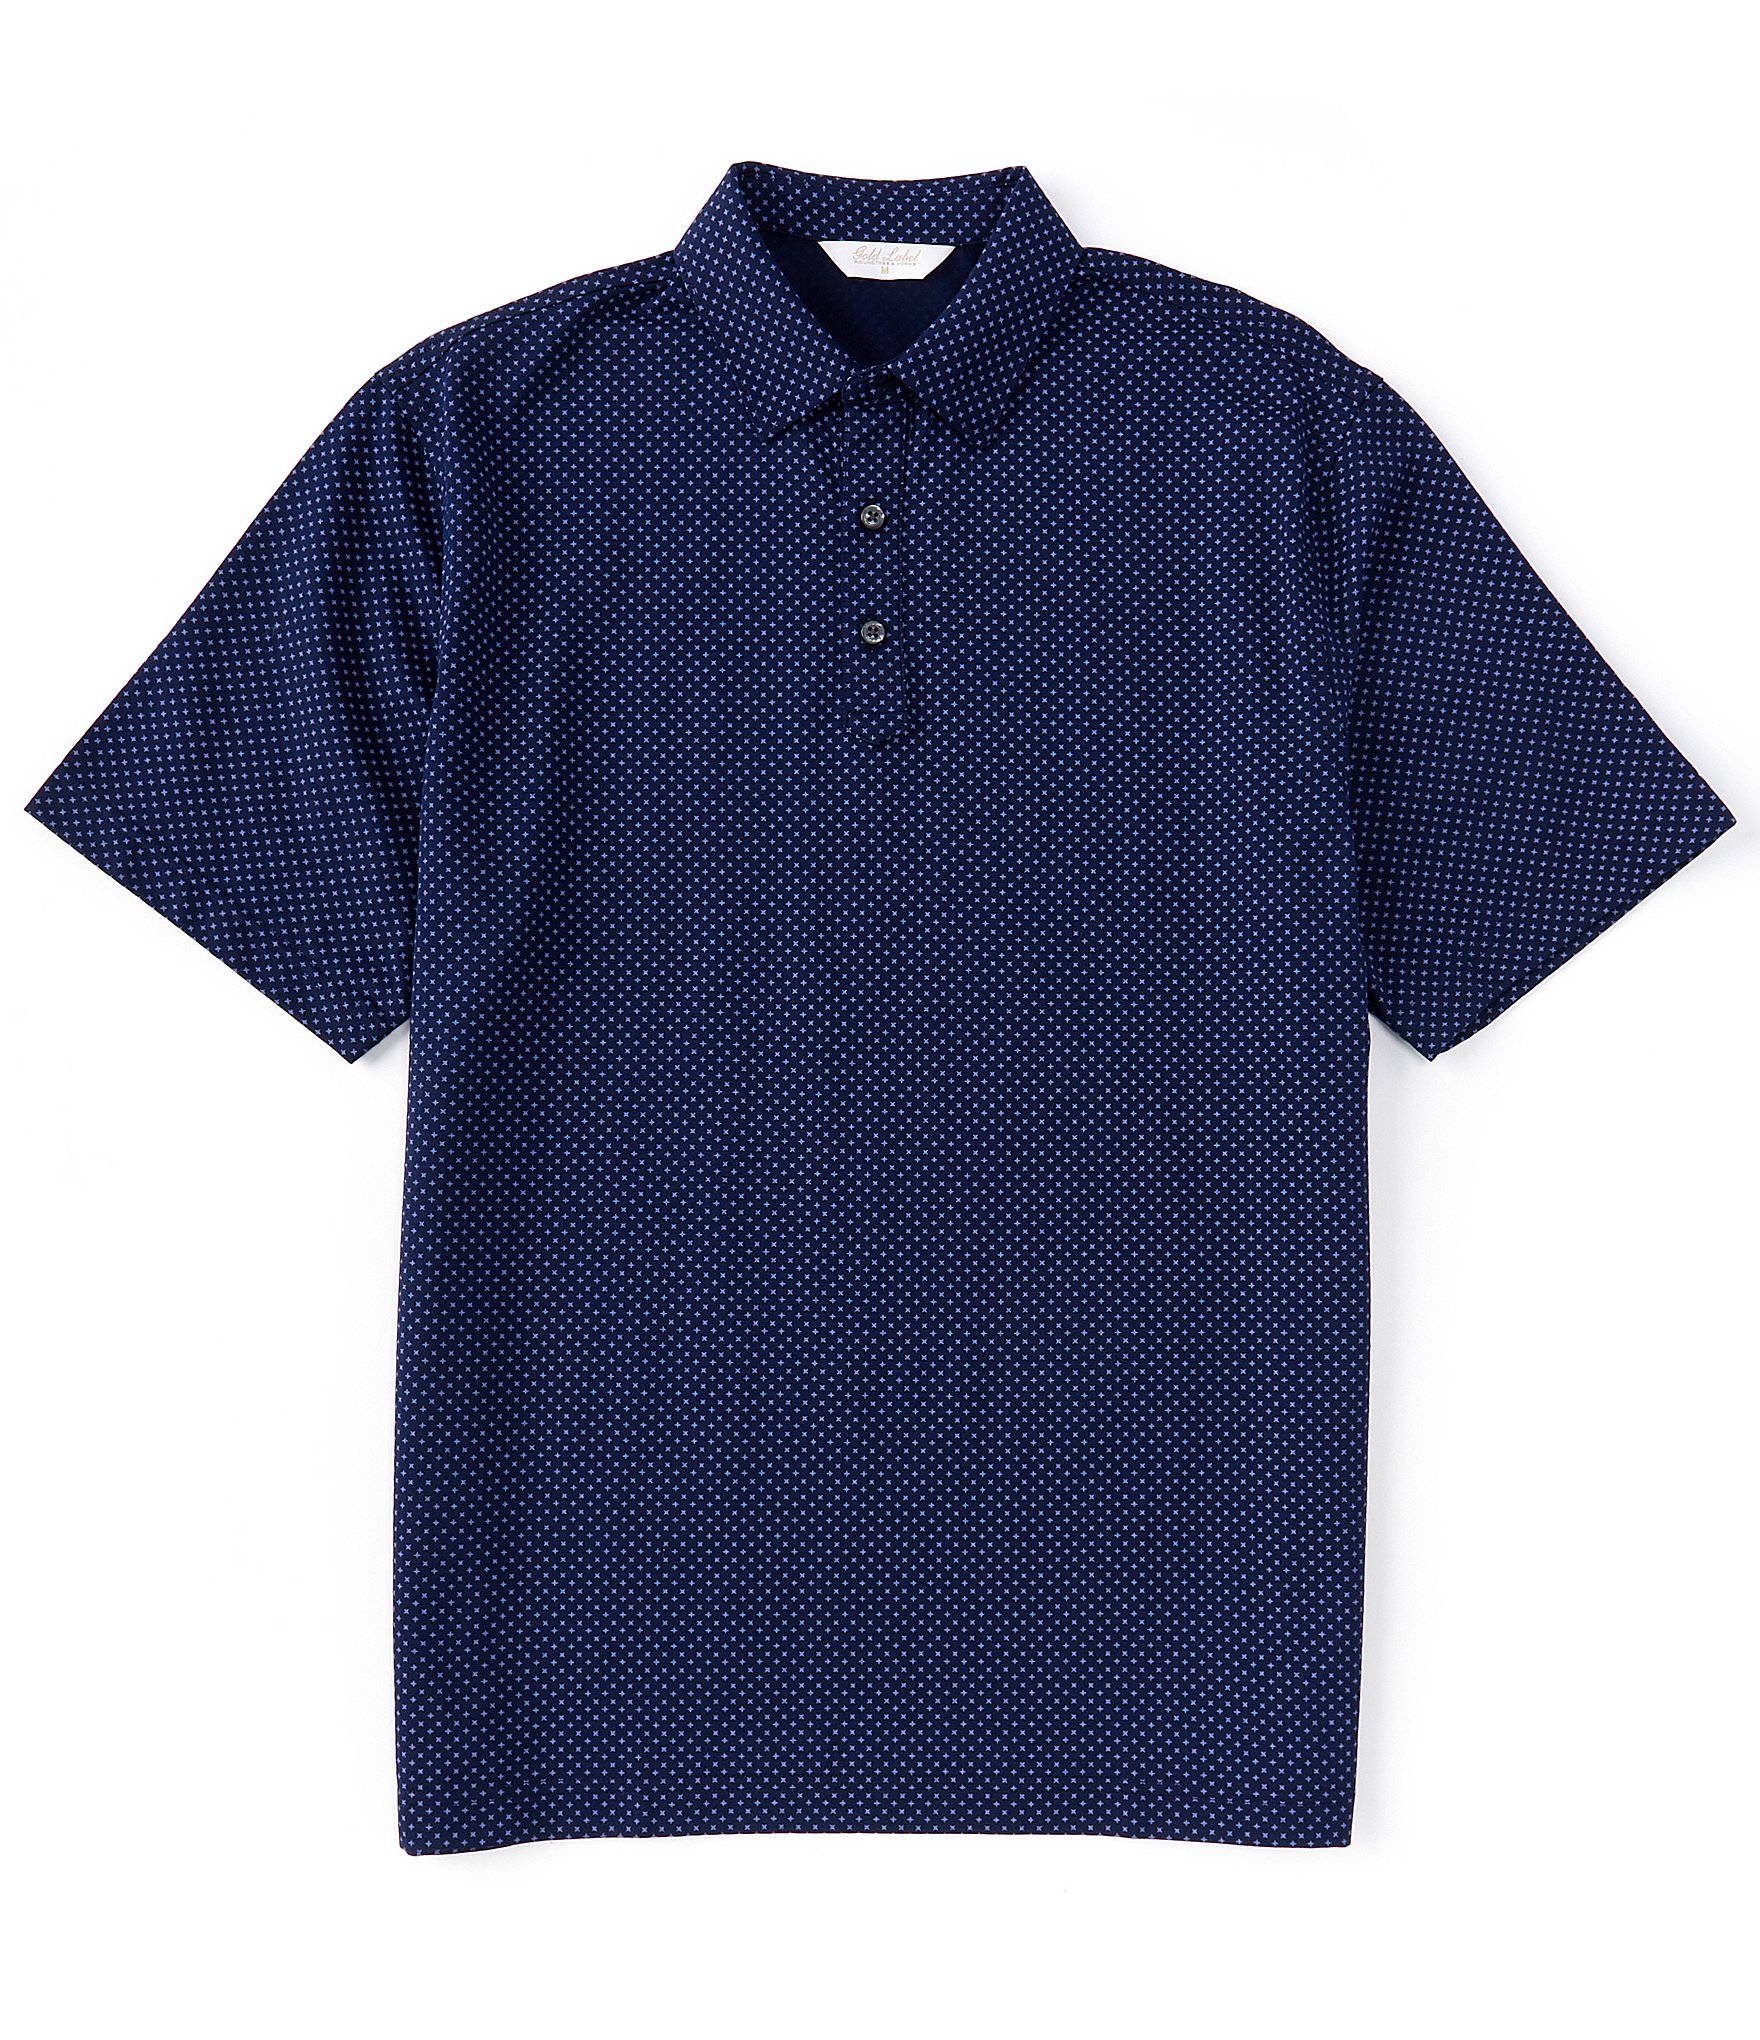 Gold Label Roundtree & Yorke Short Sleeve New Cool Print Polo Shirt ...